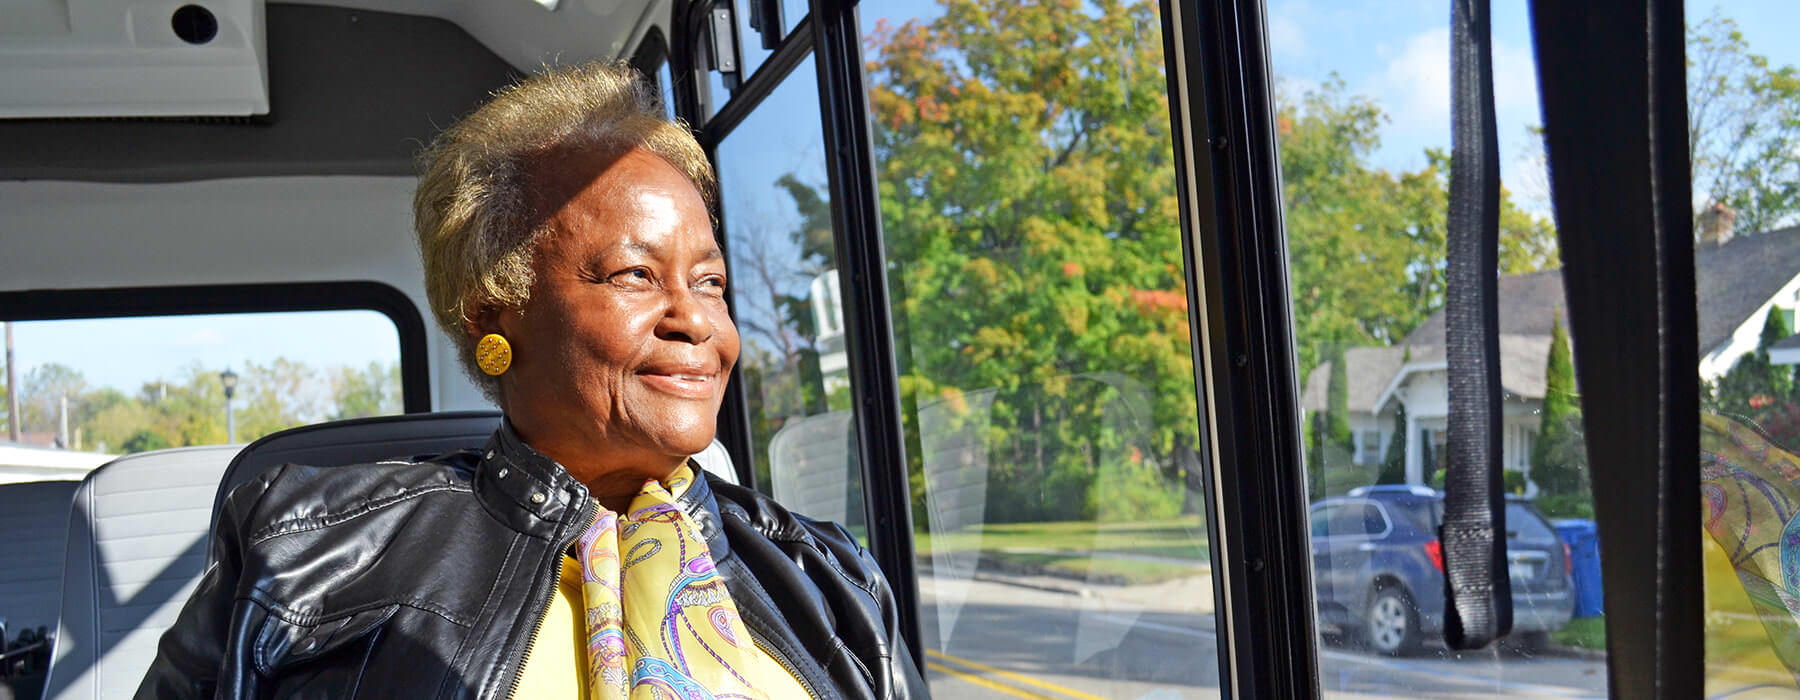 Smiling elderly woman looking out window of Your Ride bus.